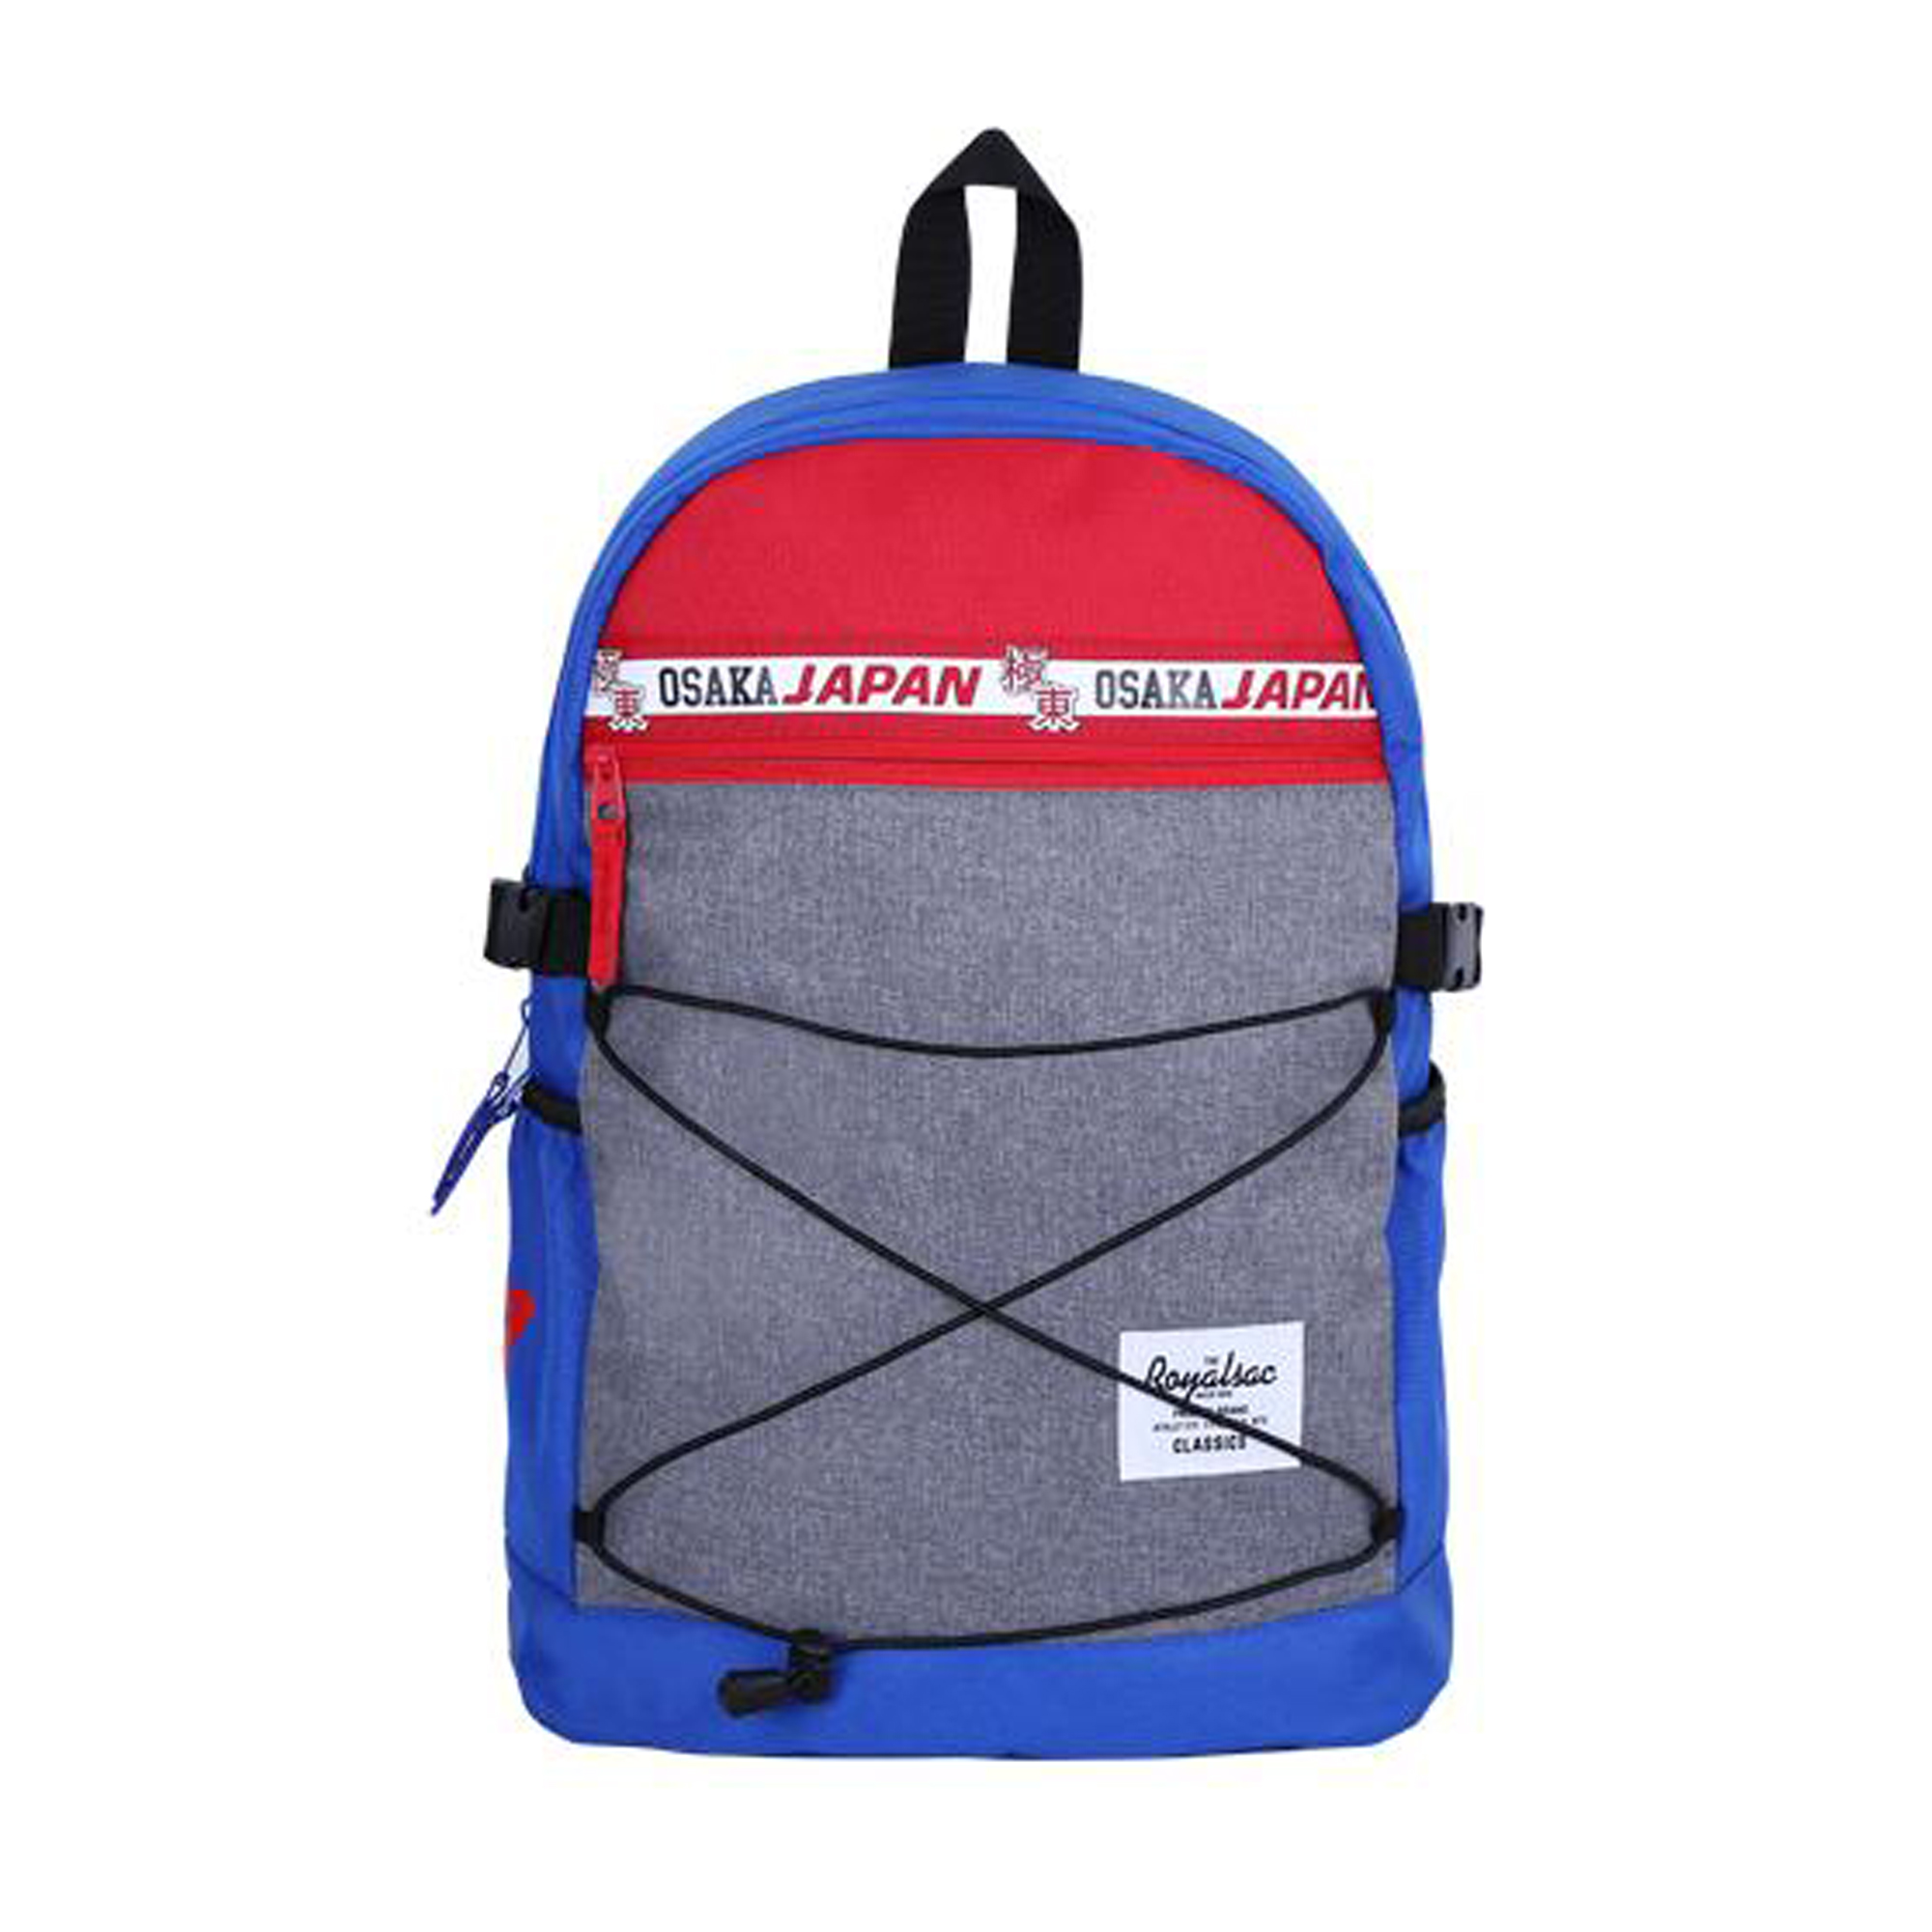 Wholesale Price China Usb Laptop Backpack Manufacture -
 B1056-004 600D Polyester – Herbert